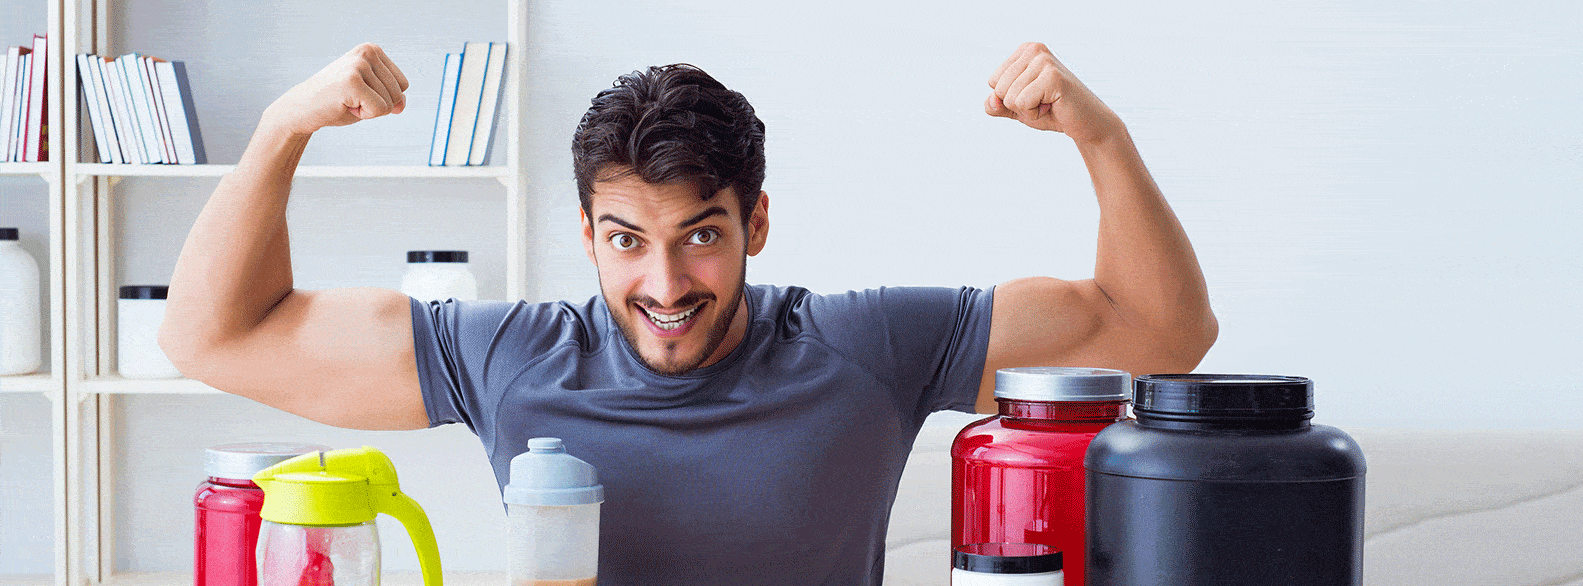 Best Workout Supplements for a Great Body